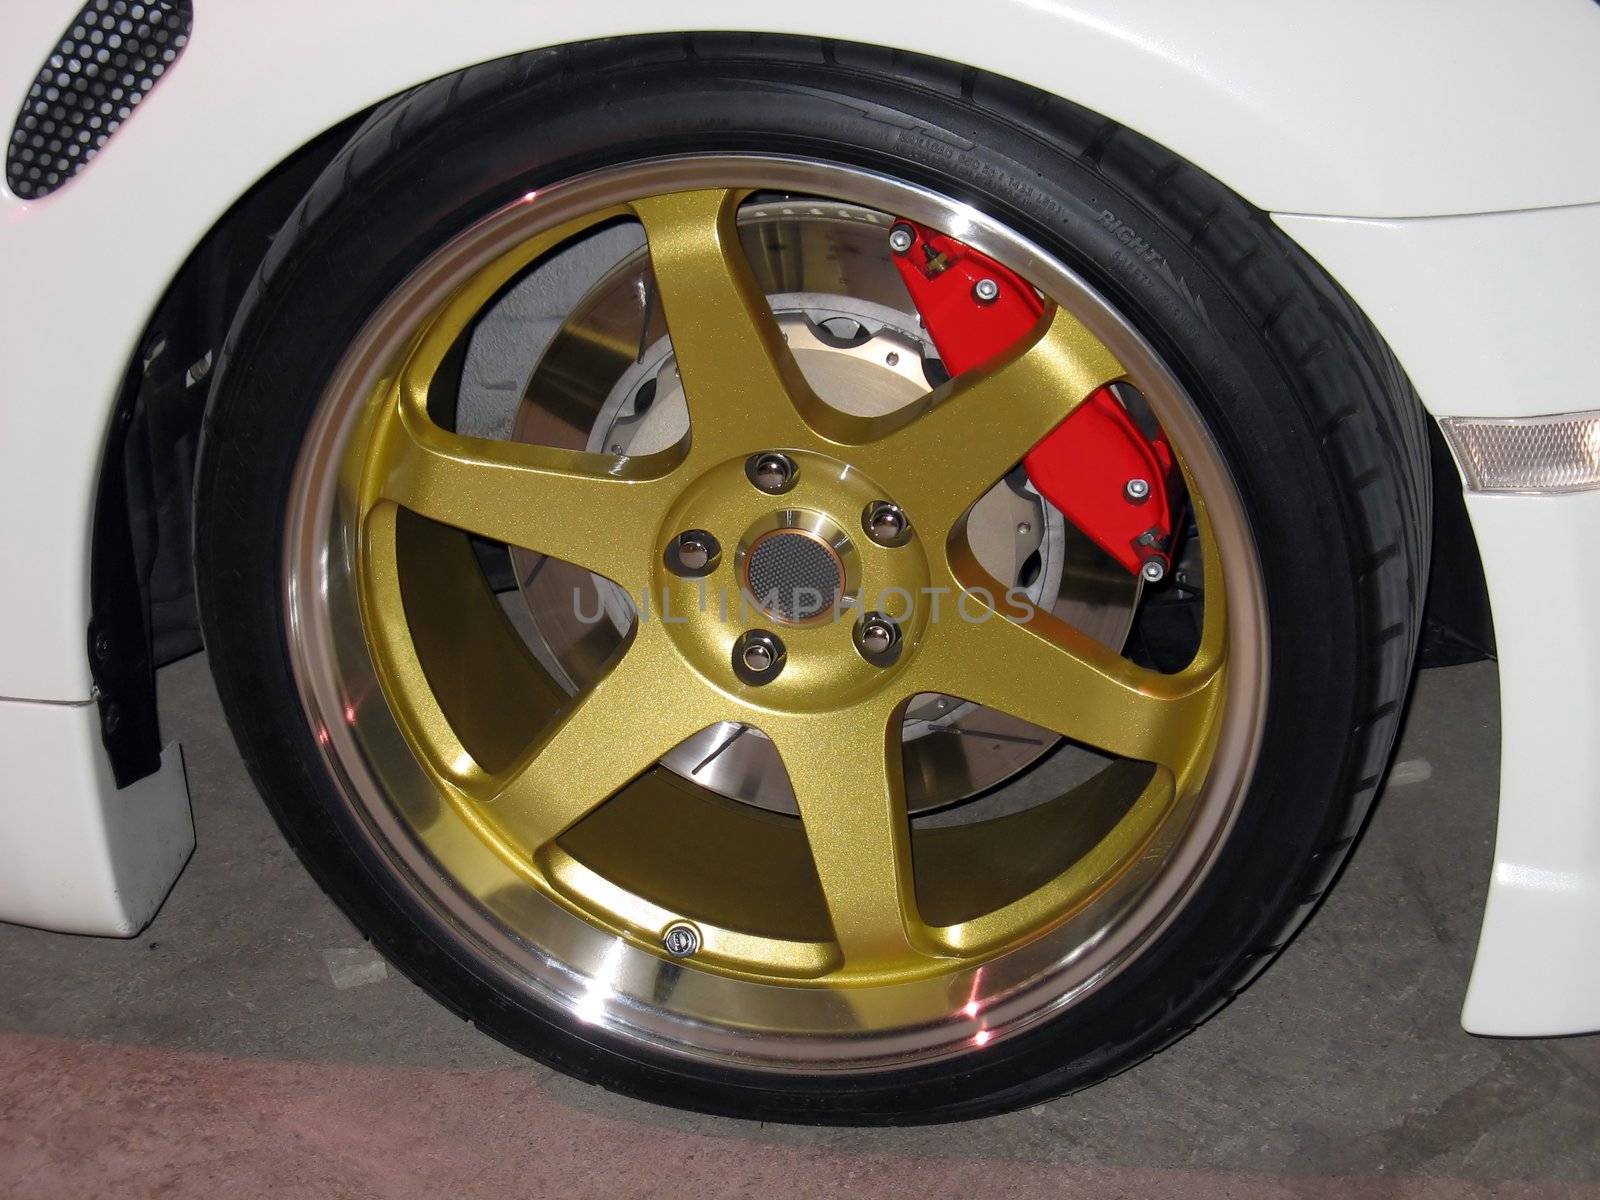 custom gold rims on a white sportscar complete with performance brakes